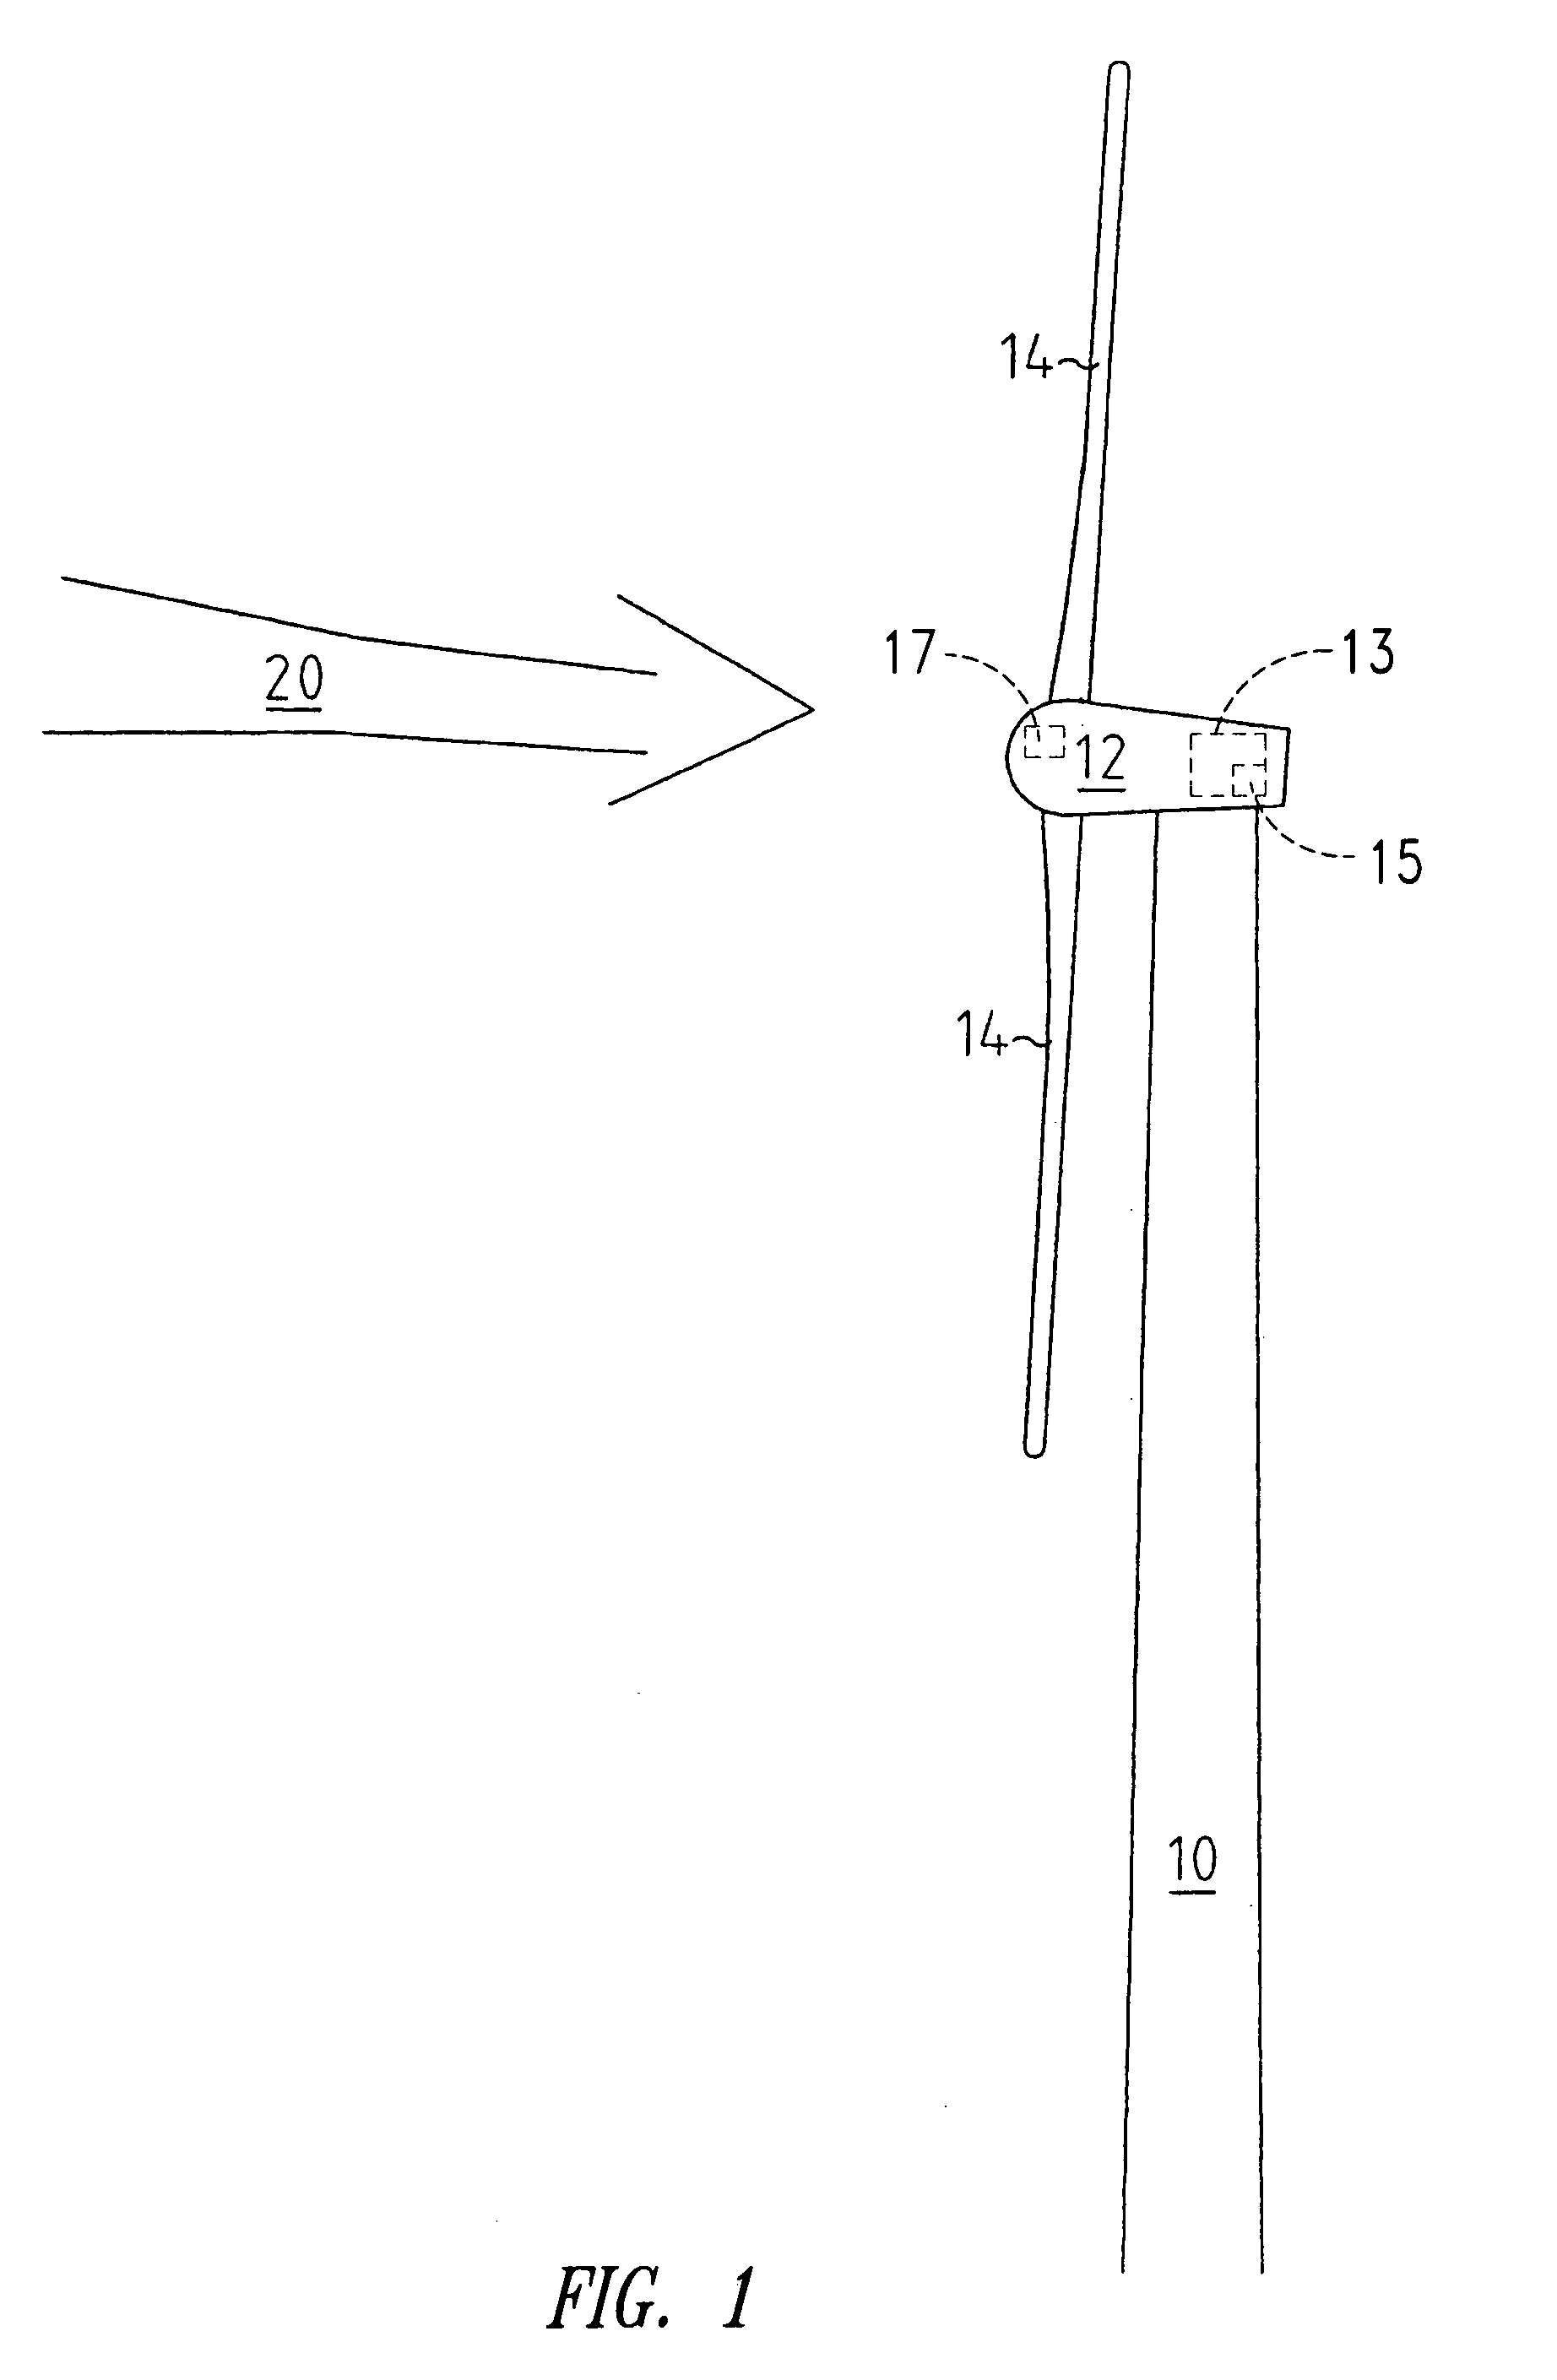 Method of controlling a wind power installation